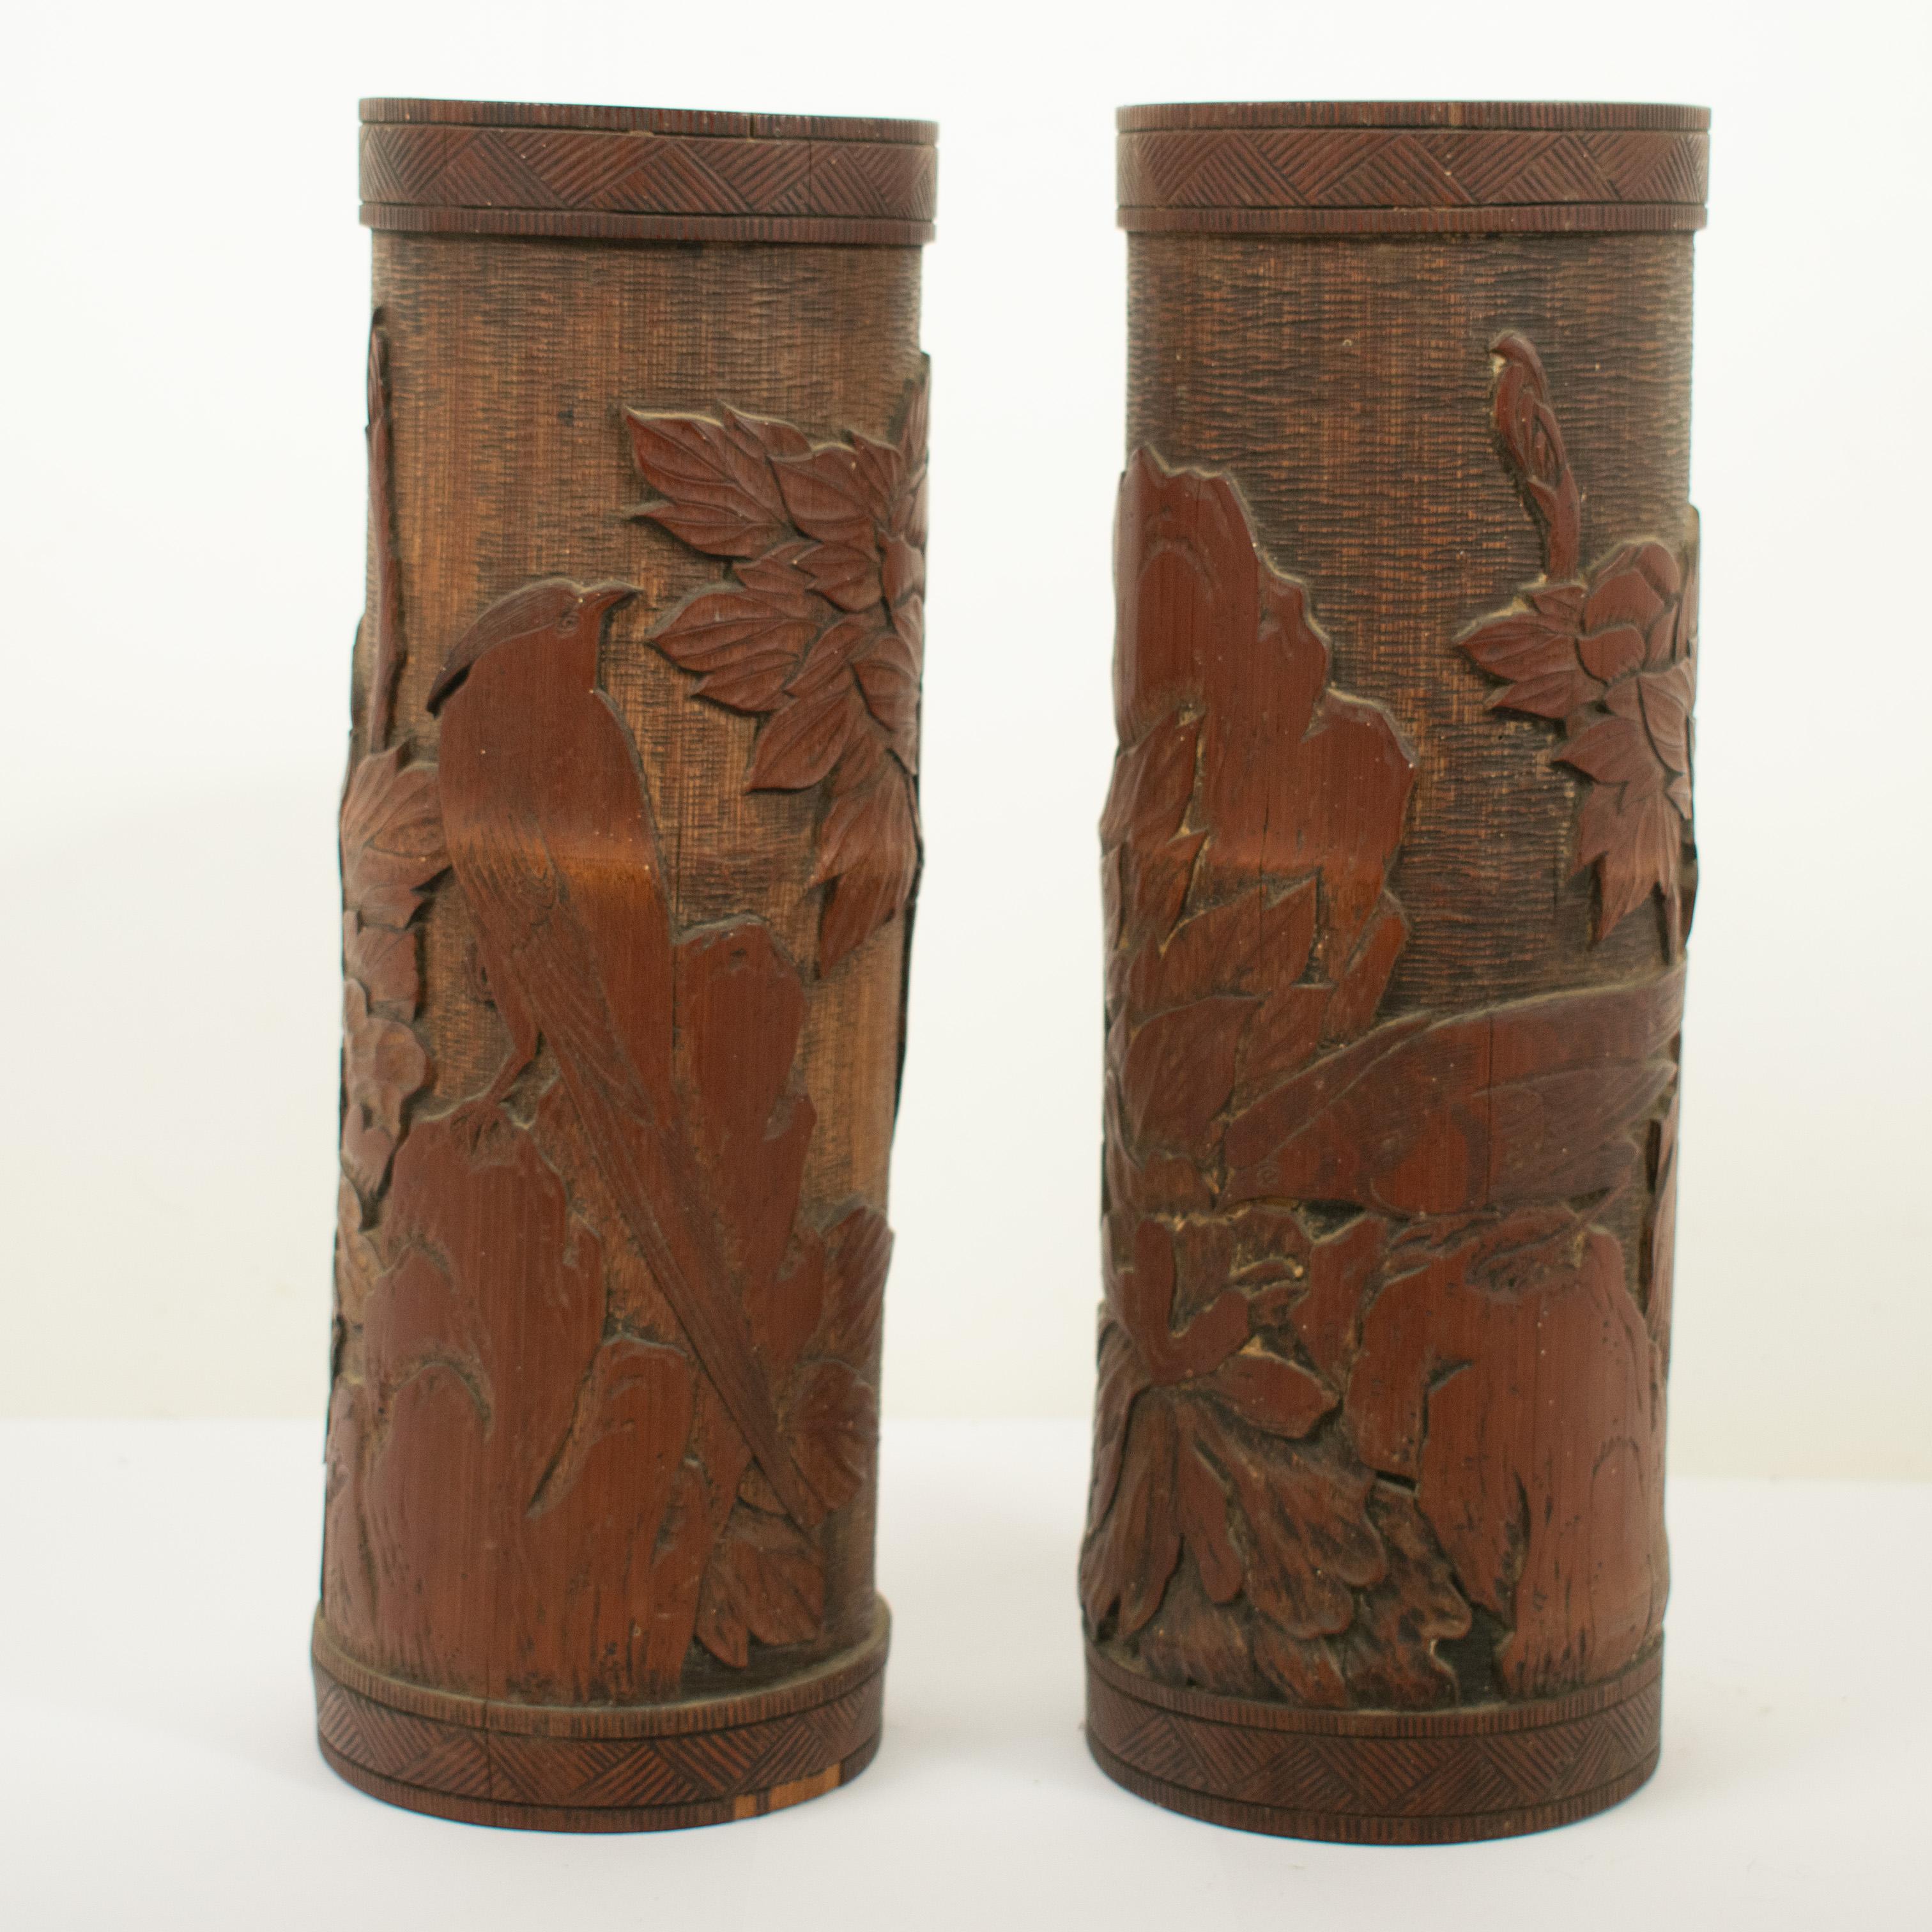 A pair of vintage Chinese bamboo brush pots. Skilfully carved with images of birds of paradise, foliage and flowers.

The pots are 'as found' and have not been restored in any way. There are some small chips to the bamboo and one of the pots has the